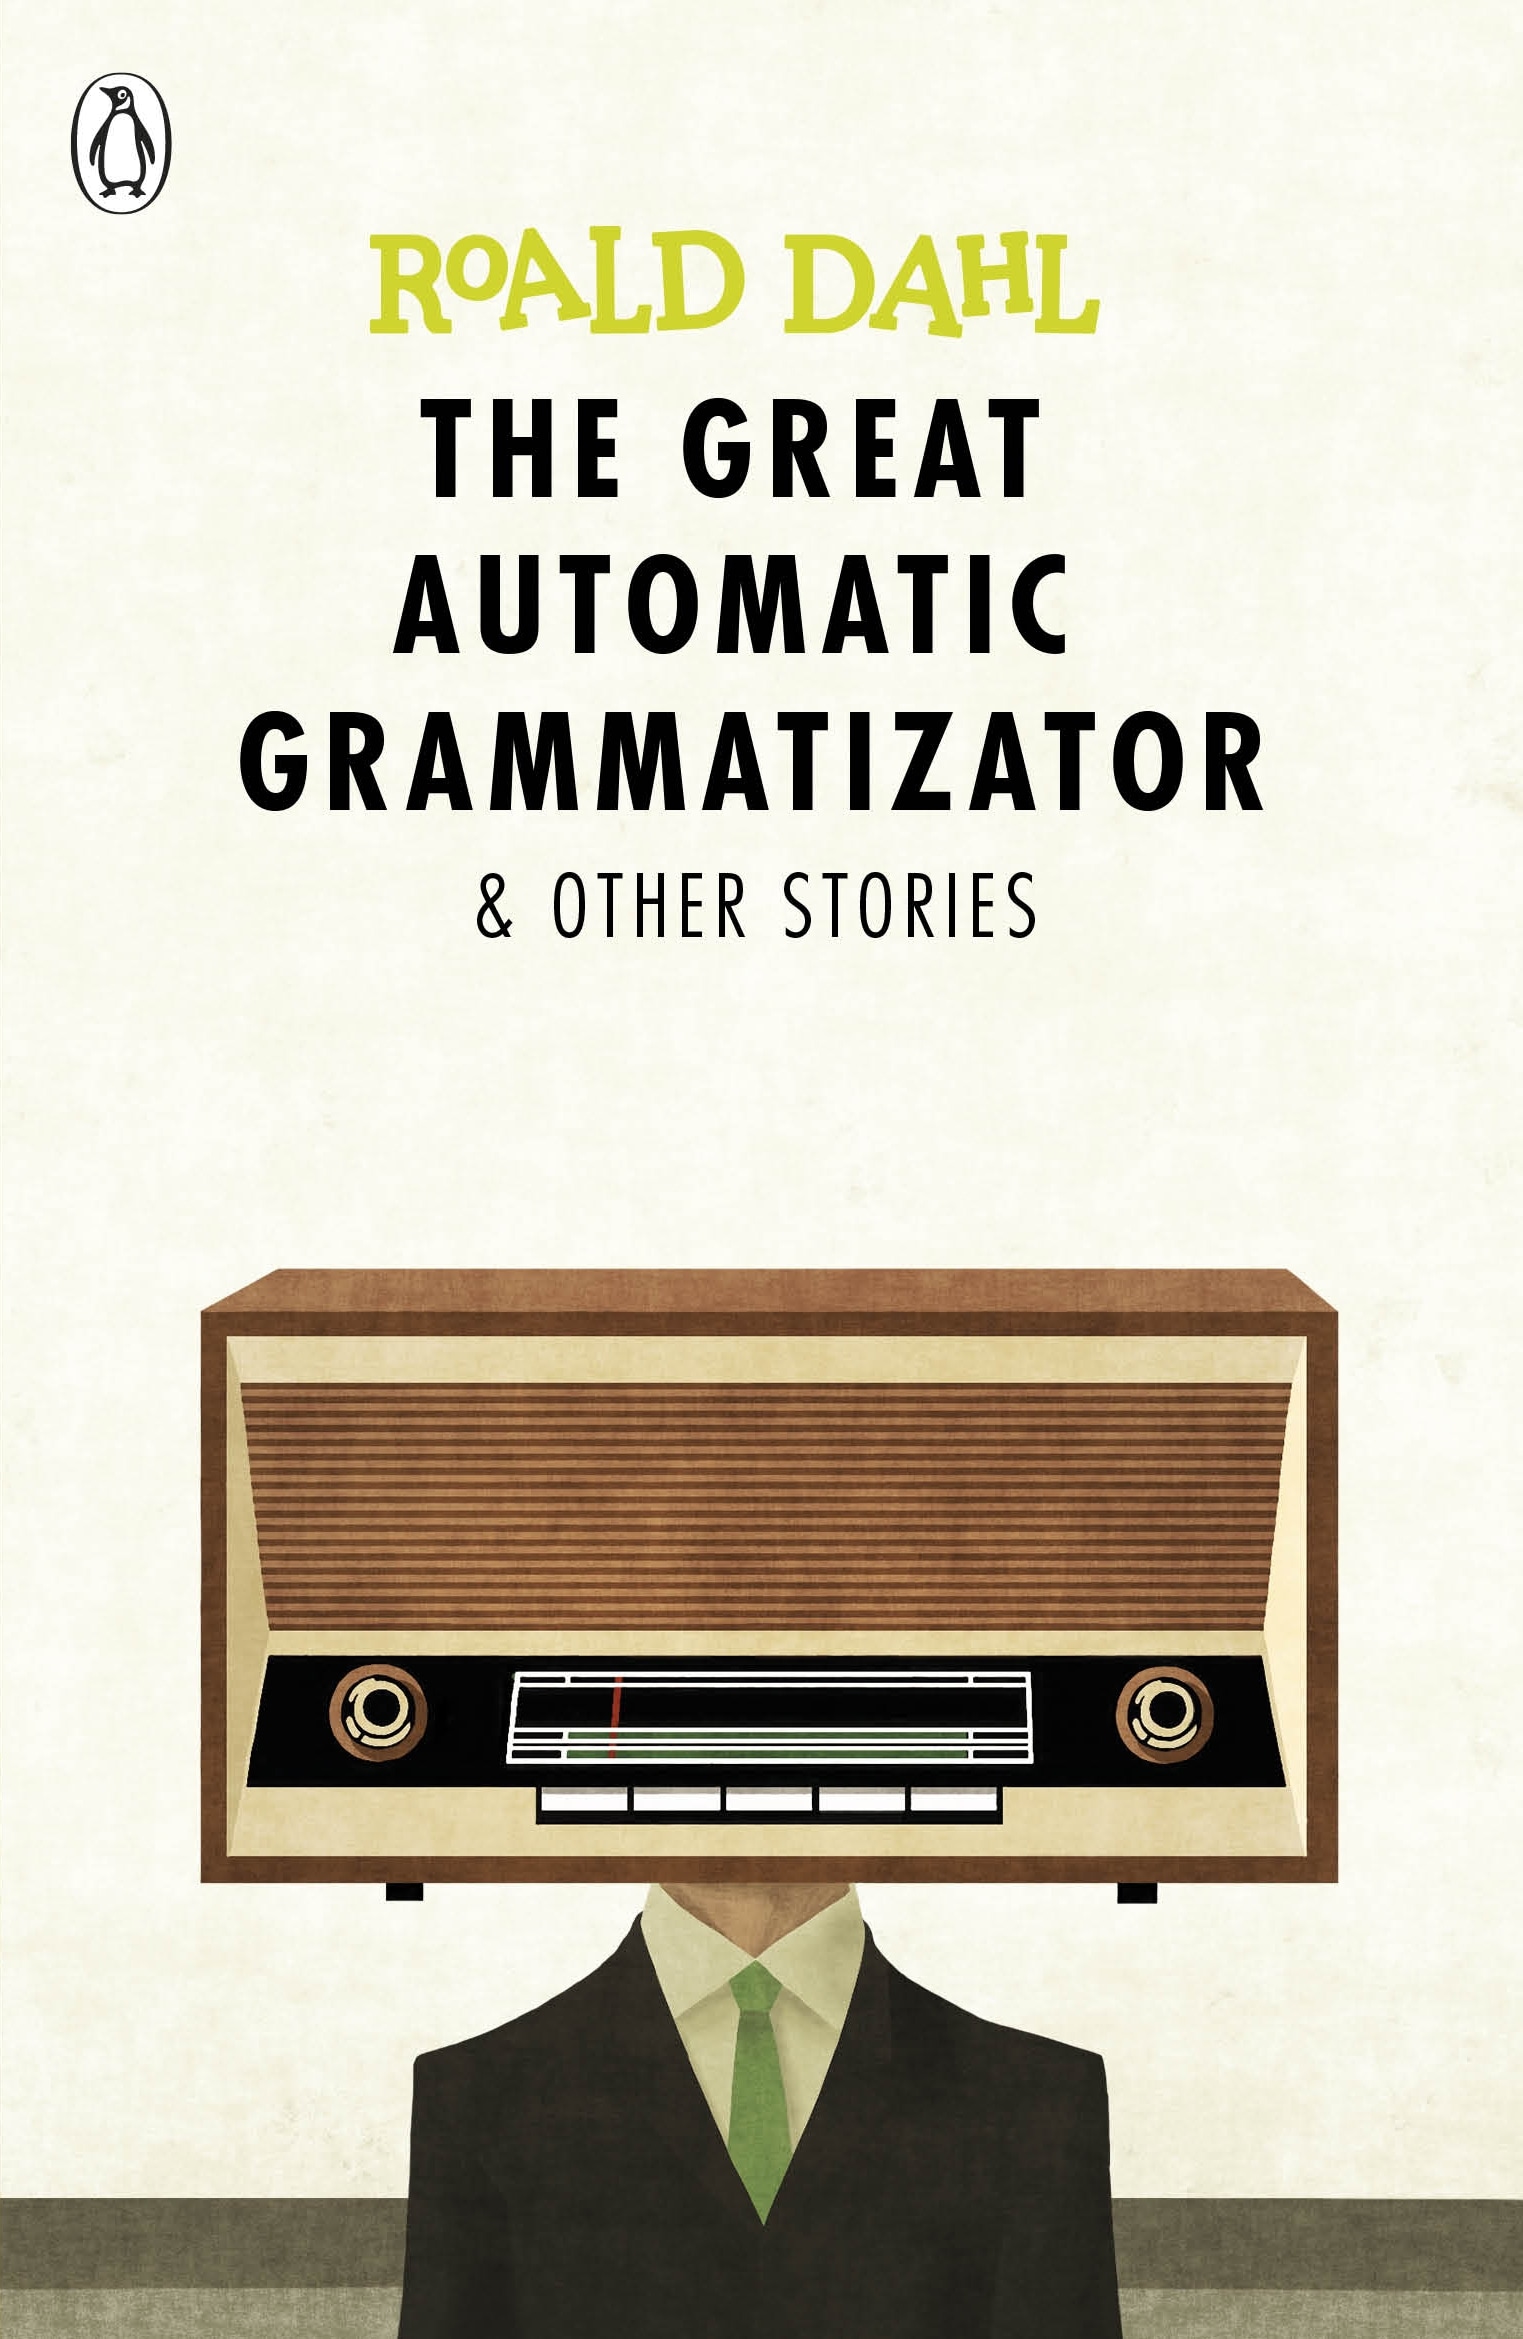 Книга «The Great Automatic Grammatizator and Other Stories» Roald Dahl — 4 мая 2017 г.